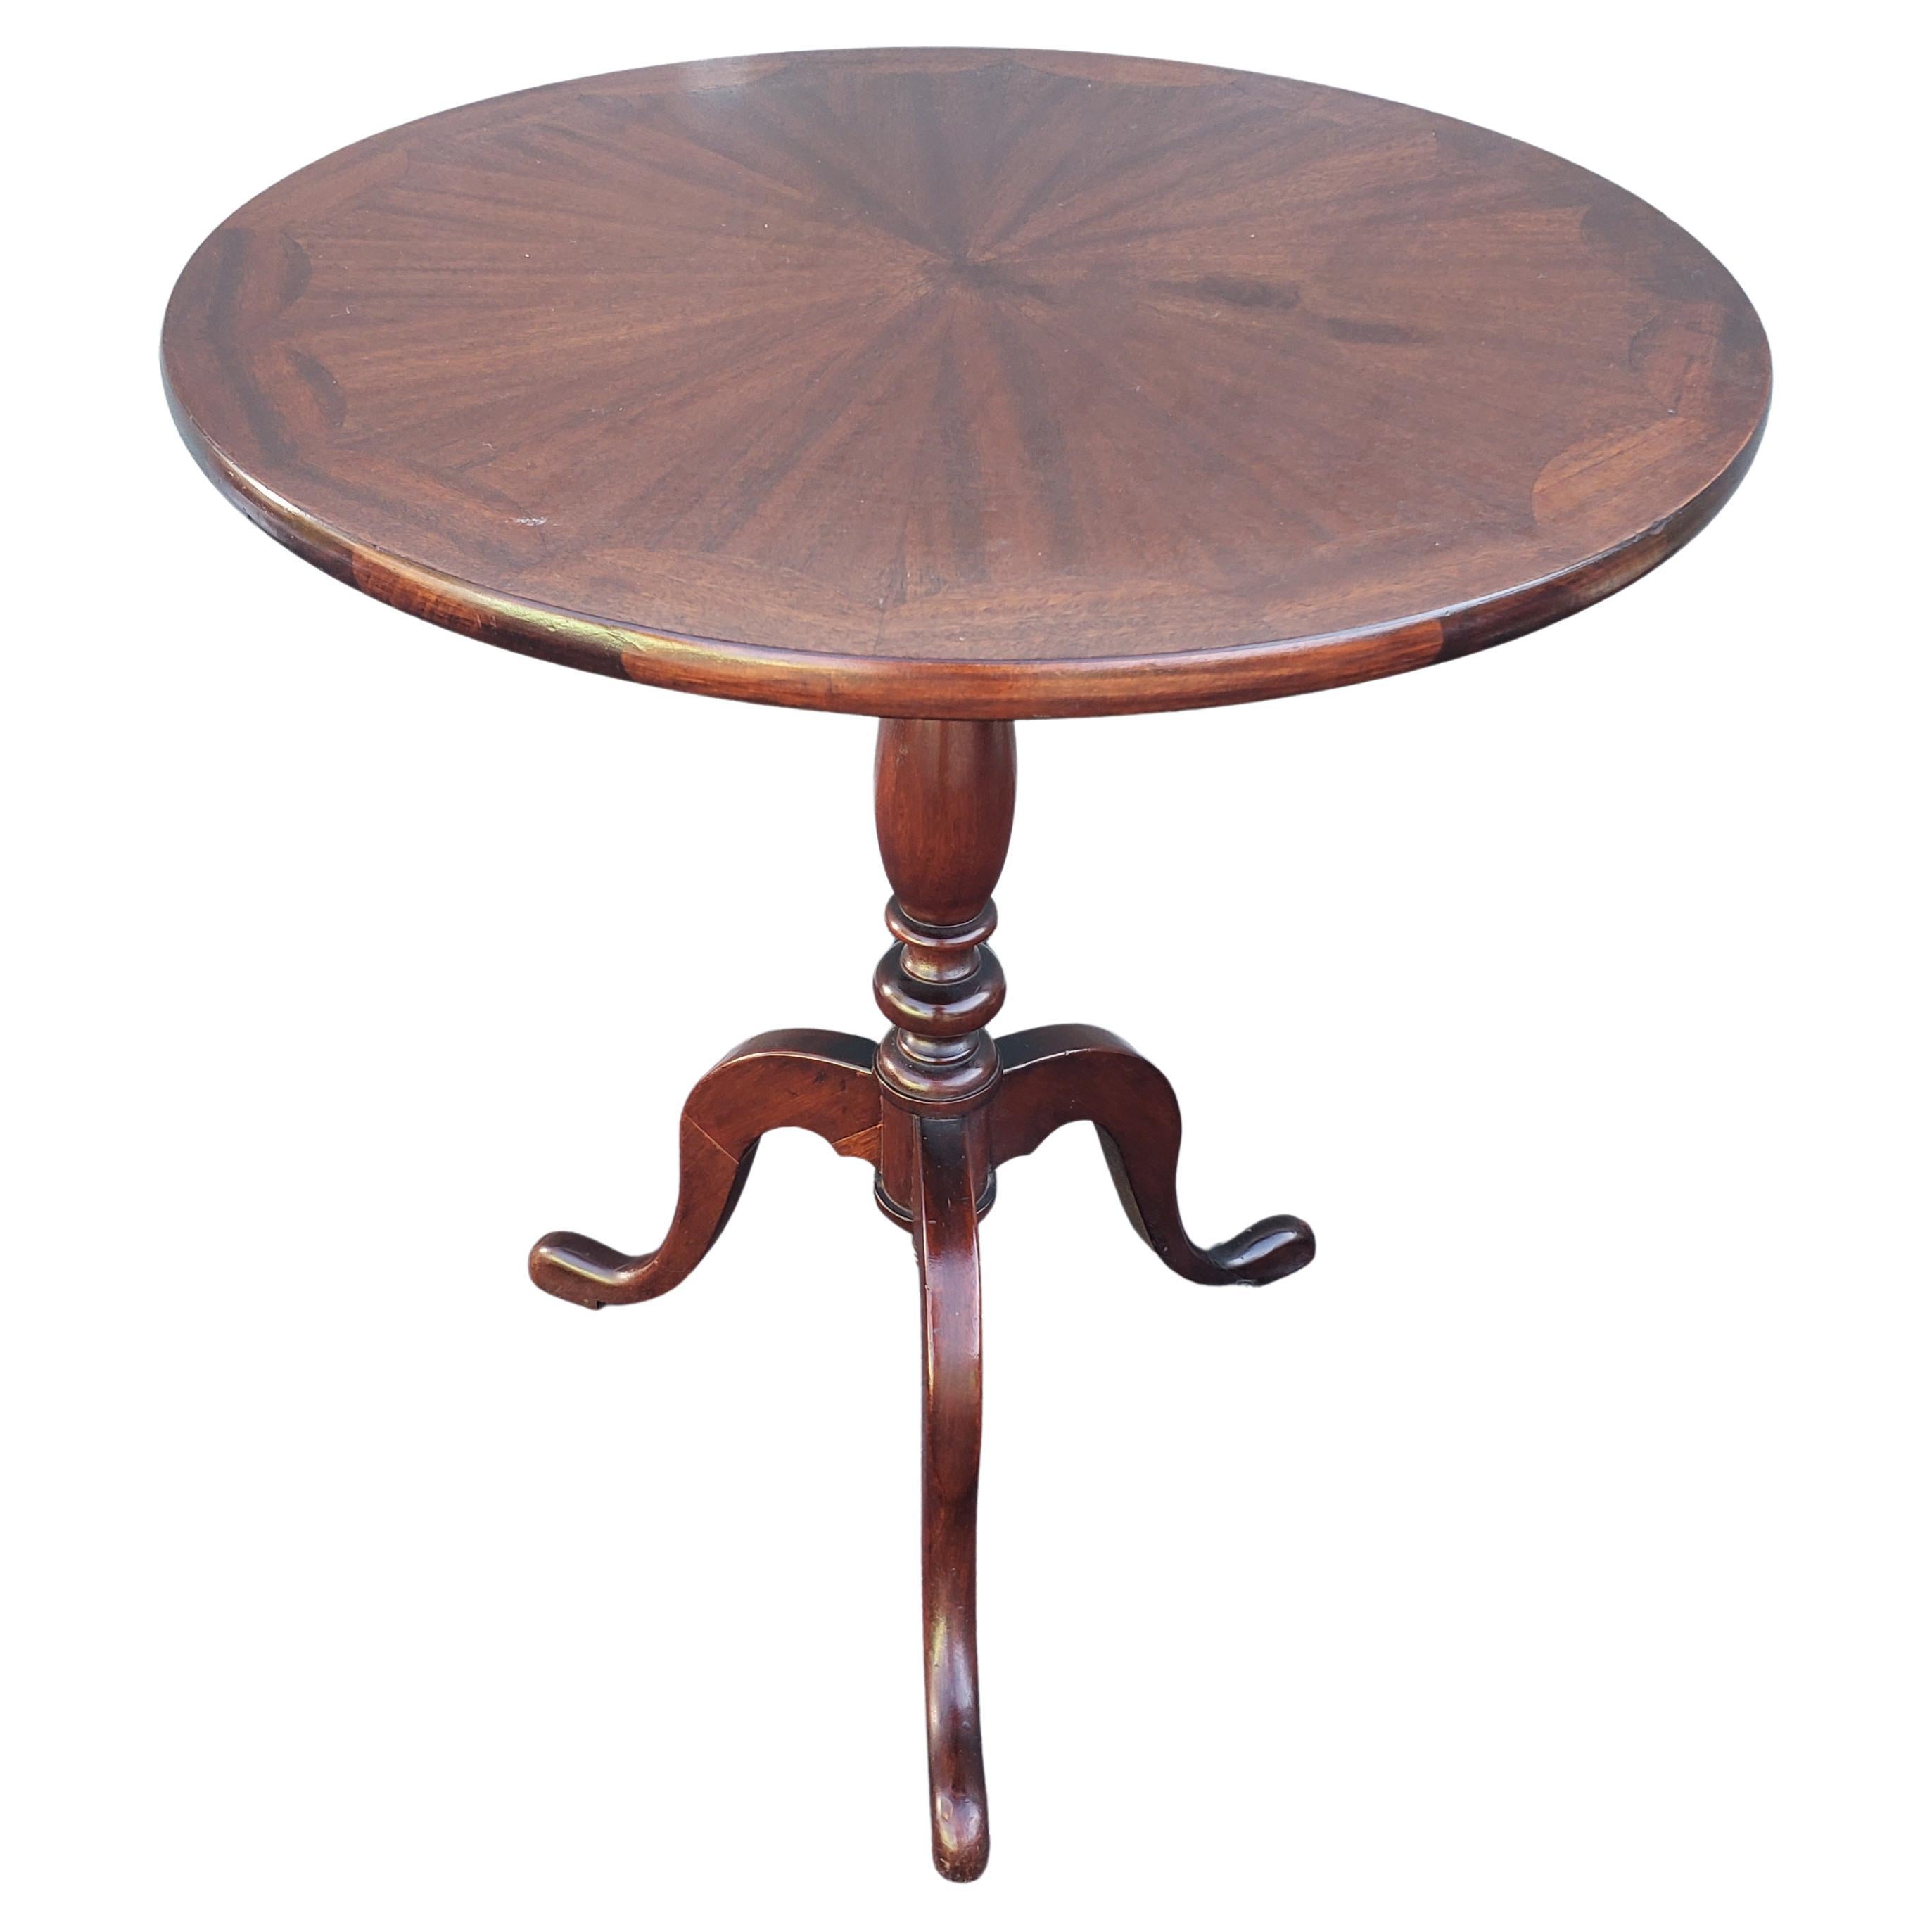 Iron English Mahogany One Board Parquetry Tilt-Top Tea Table Desert Table, C. 1860s For Sale